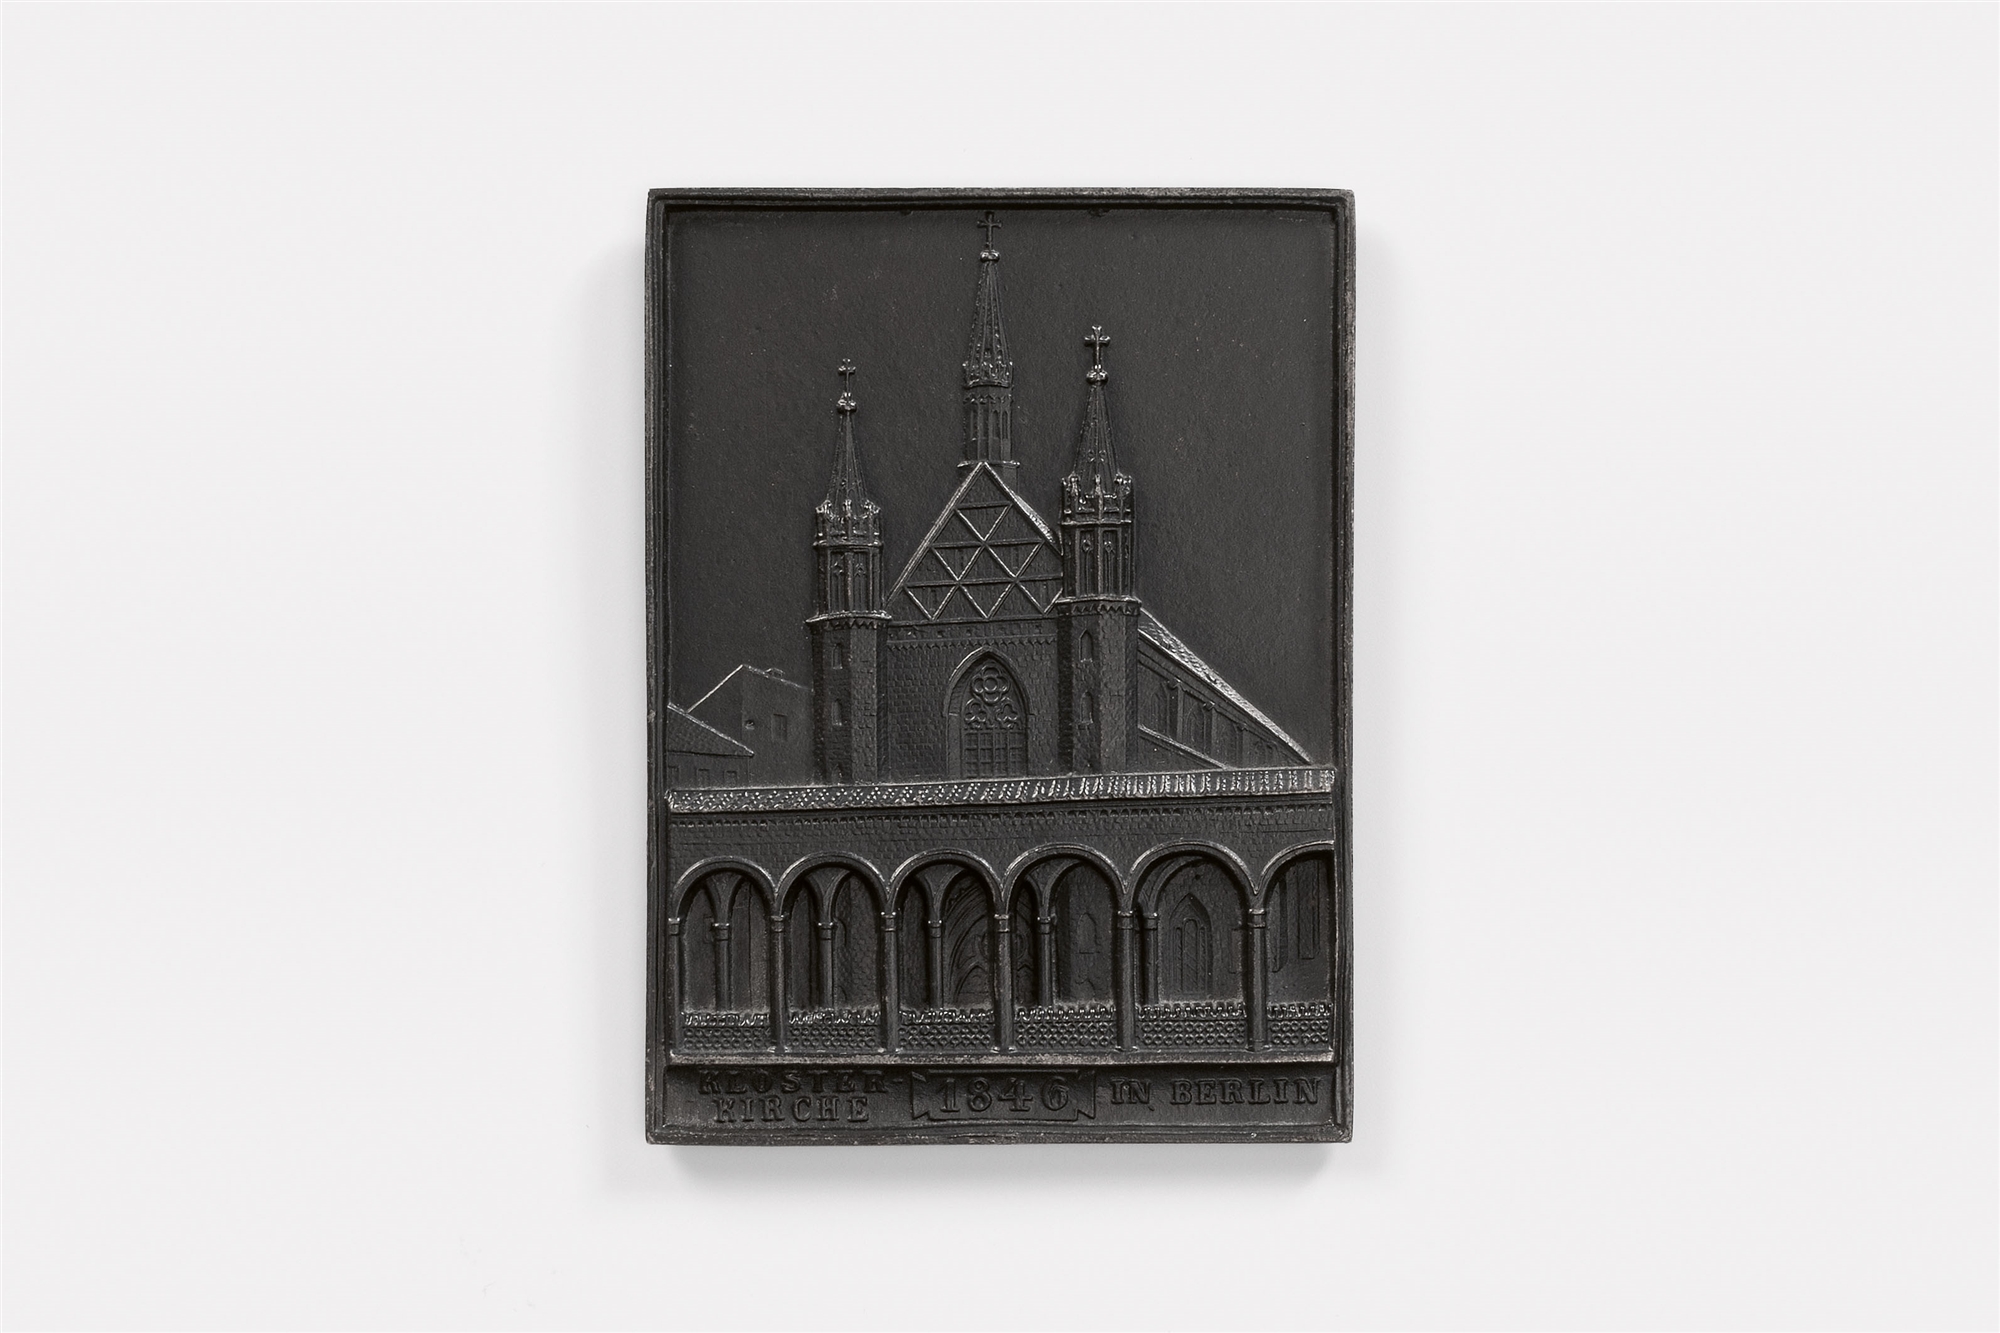 A cast iron New Year's plaque inscribed "KLOSTER-KIRCHE 1846 IN BERLIN"